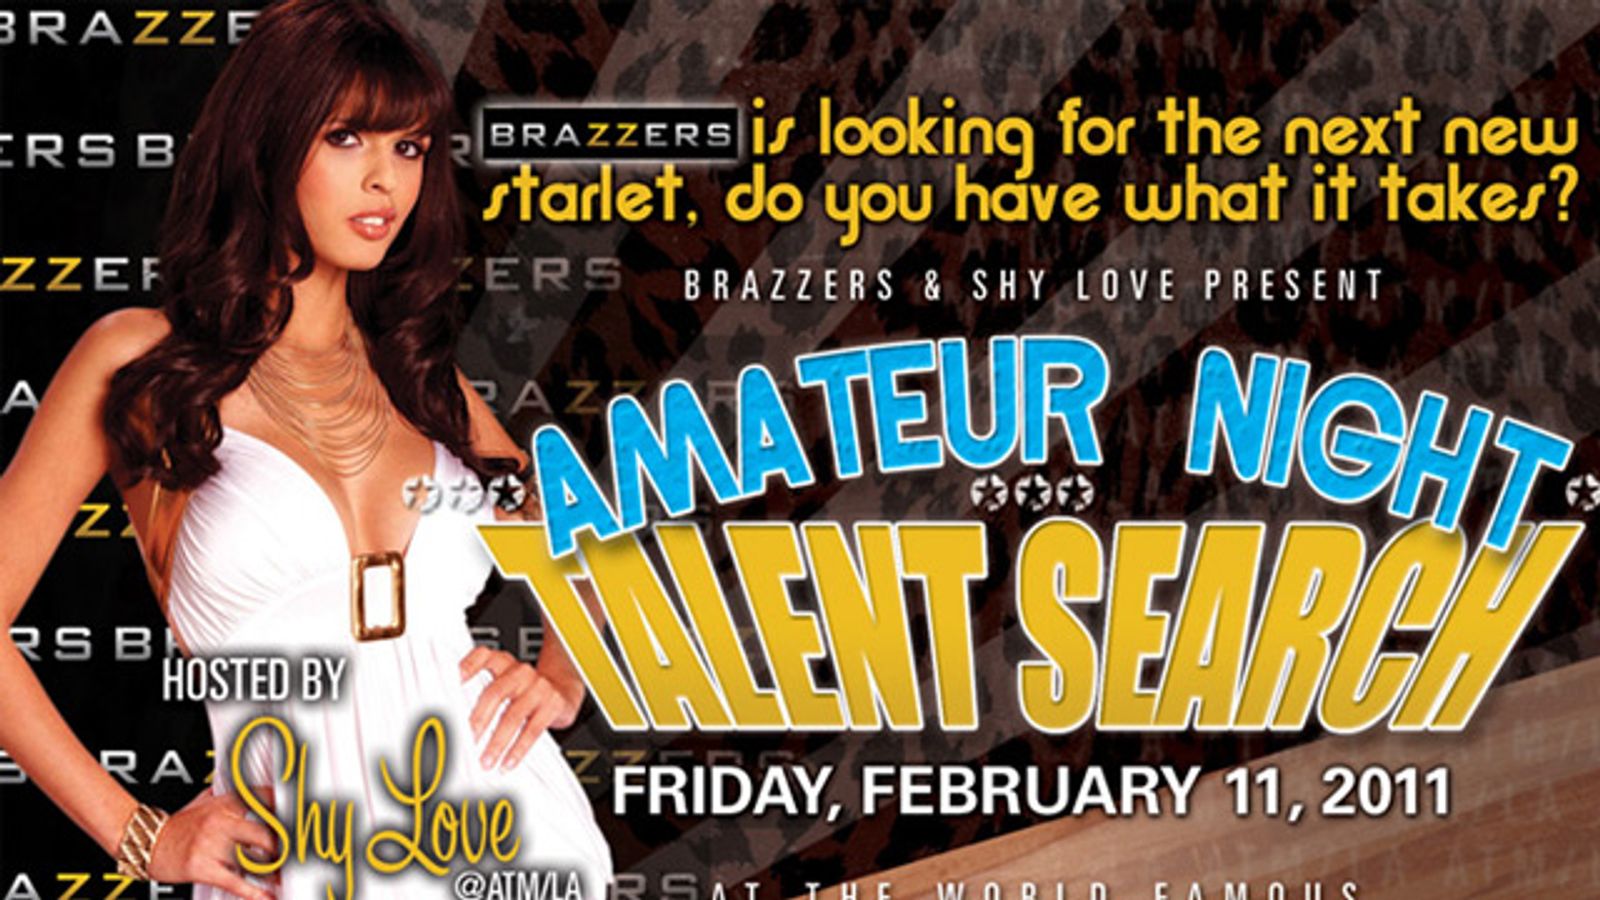 Brazzers and Shy Love Team Up on Amateur Night Talent Search at Spearmint Rhino in Kentucky